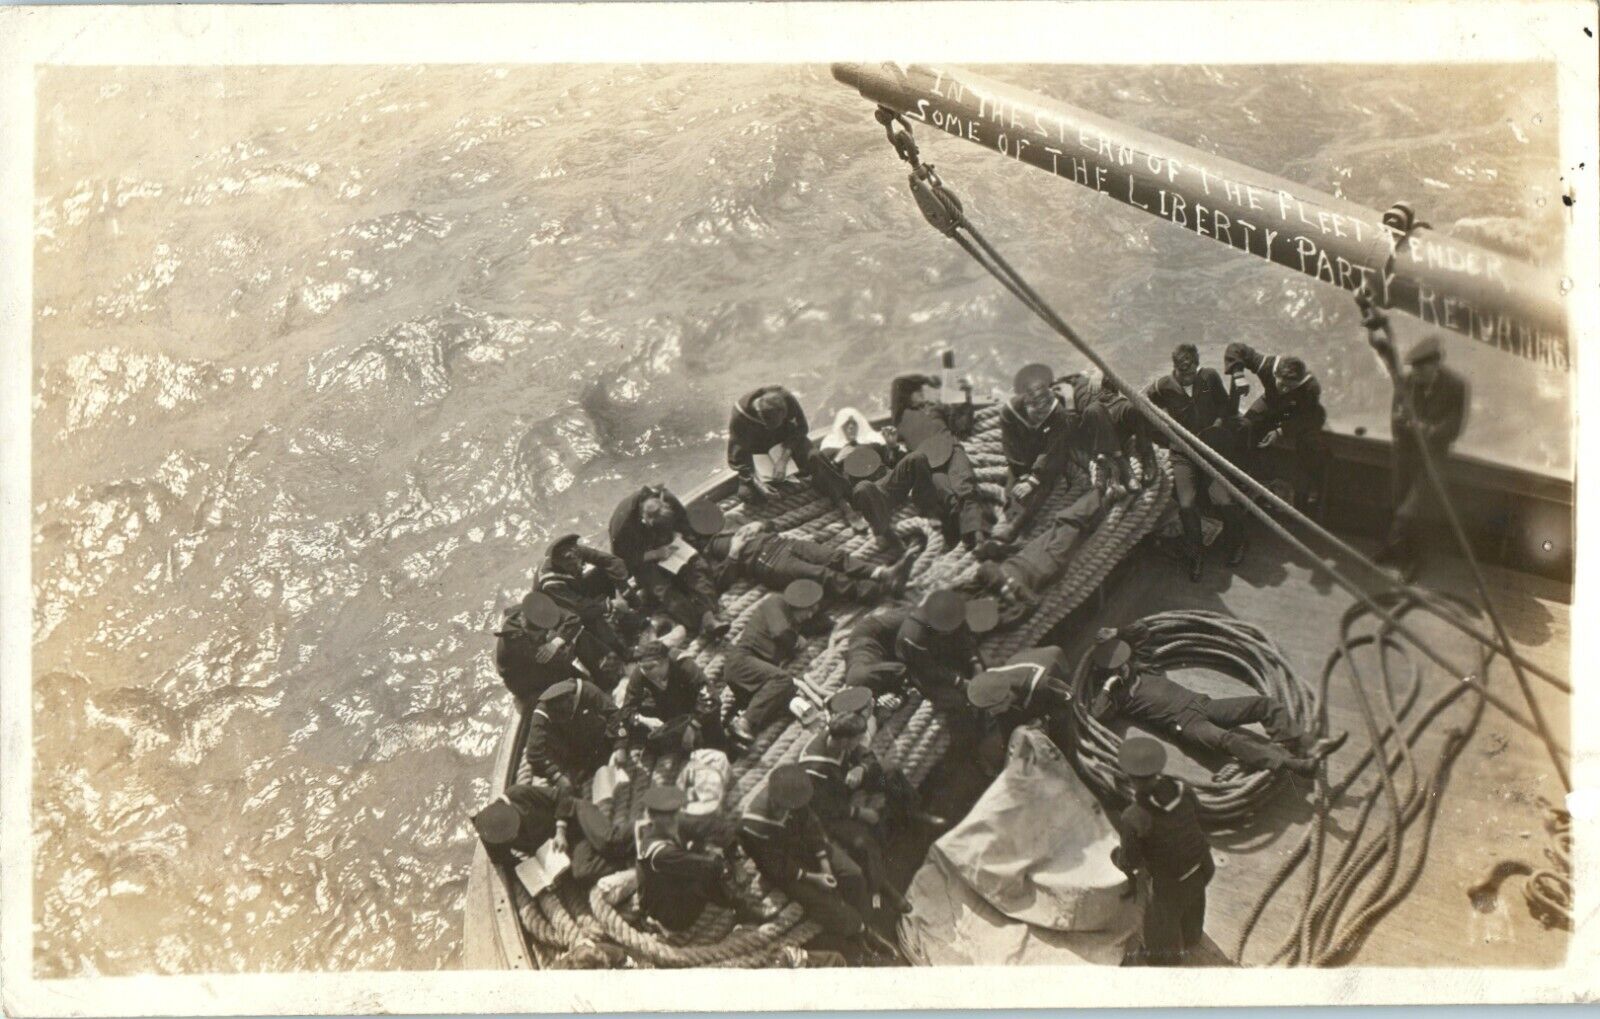 RPPC LIBERTY PARTY RETURNS IN THE STERN OF THE FLEET WWI WW1 era US SAILORS NAVY